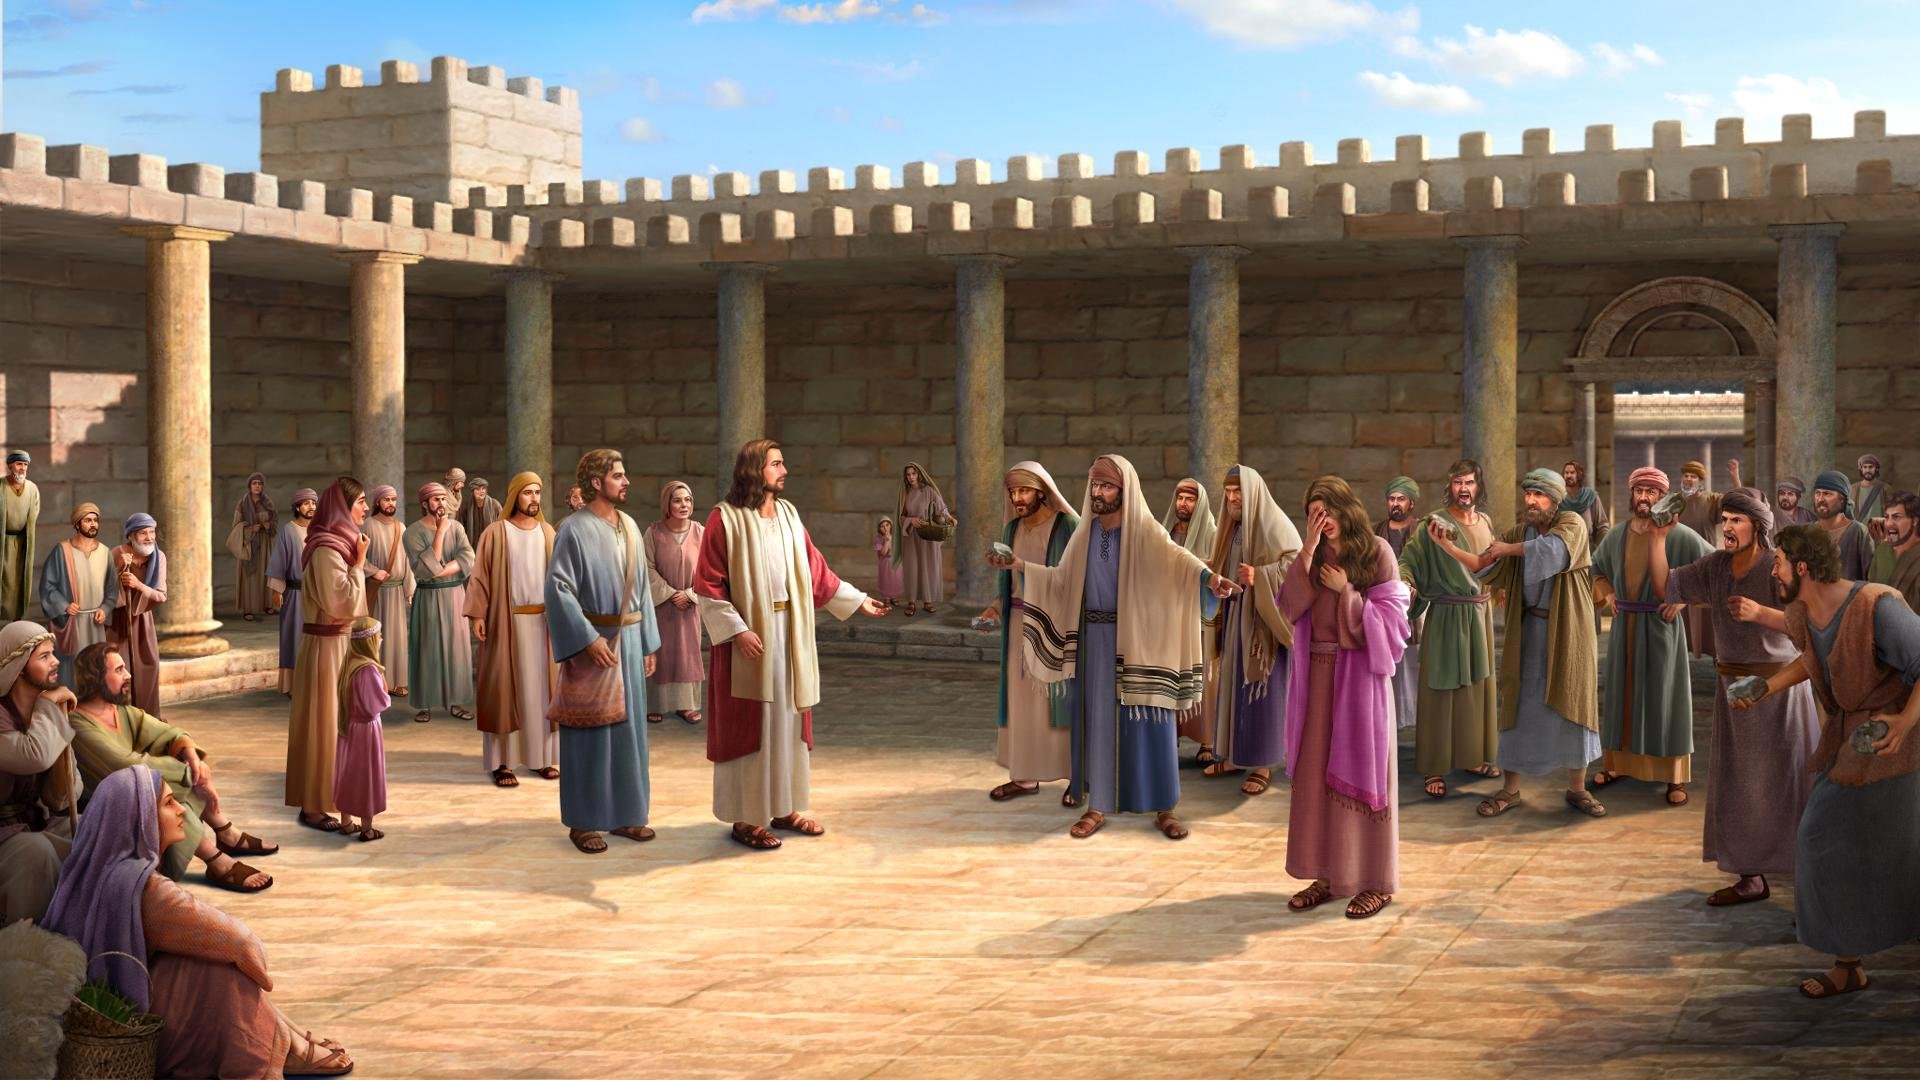 The Pharisees Bring A Promiscuous Married Woman Before The Lord Jesus